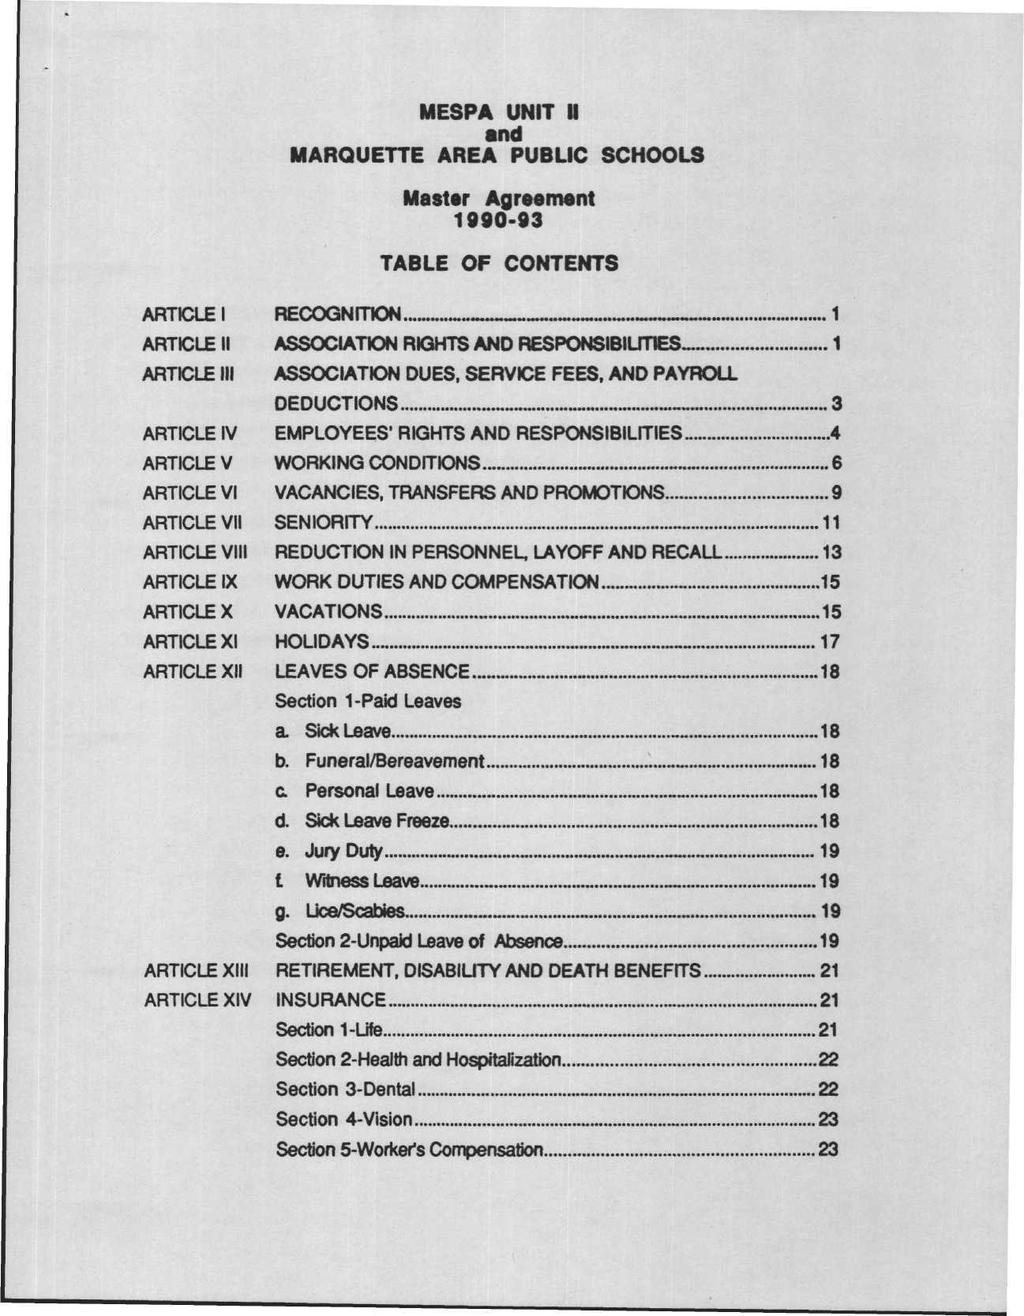 MESPA UNIT II and MARQUETTE AREA PUBLIC SCHOOLS Master Agreement 1990-93 TABLE OF CONTENTS ARTICLE I RECOGNITION 1 ARTICLE II ASSOCIATION RIGHTS AND RESPONSIBILITIES 1 ARTICLE III ASSOCIATION DUES,